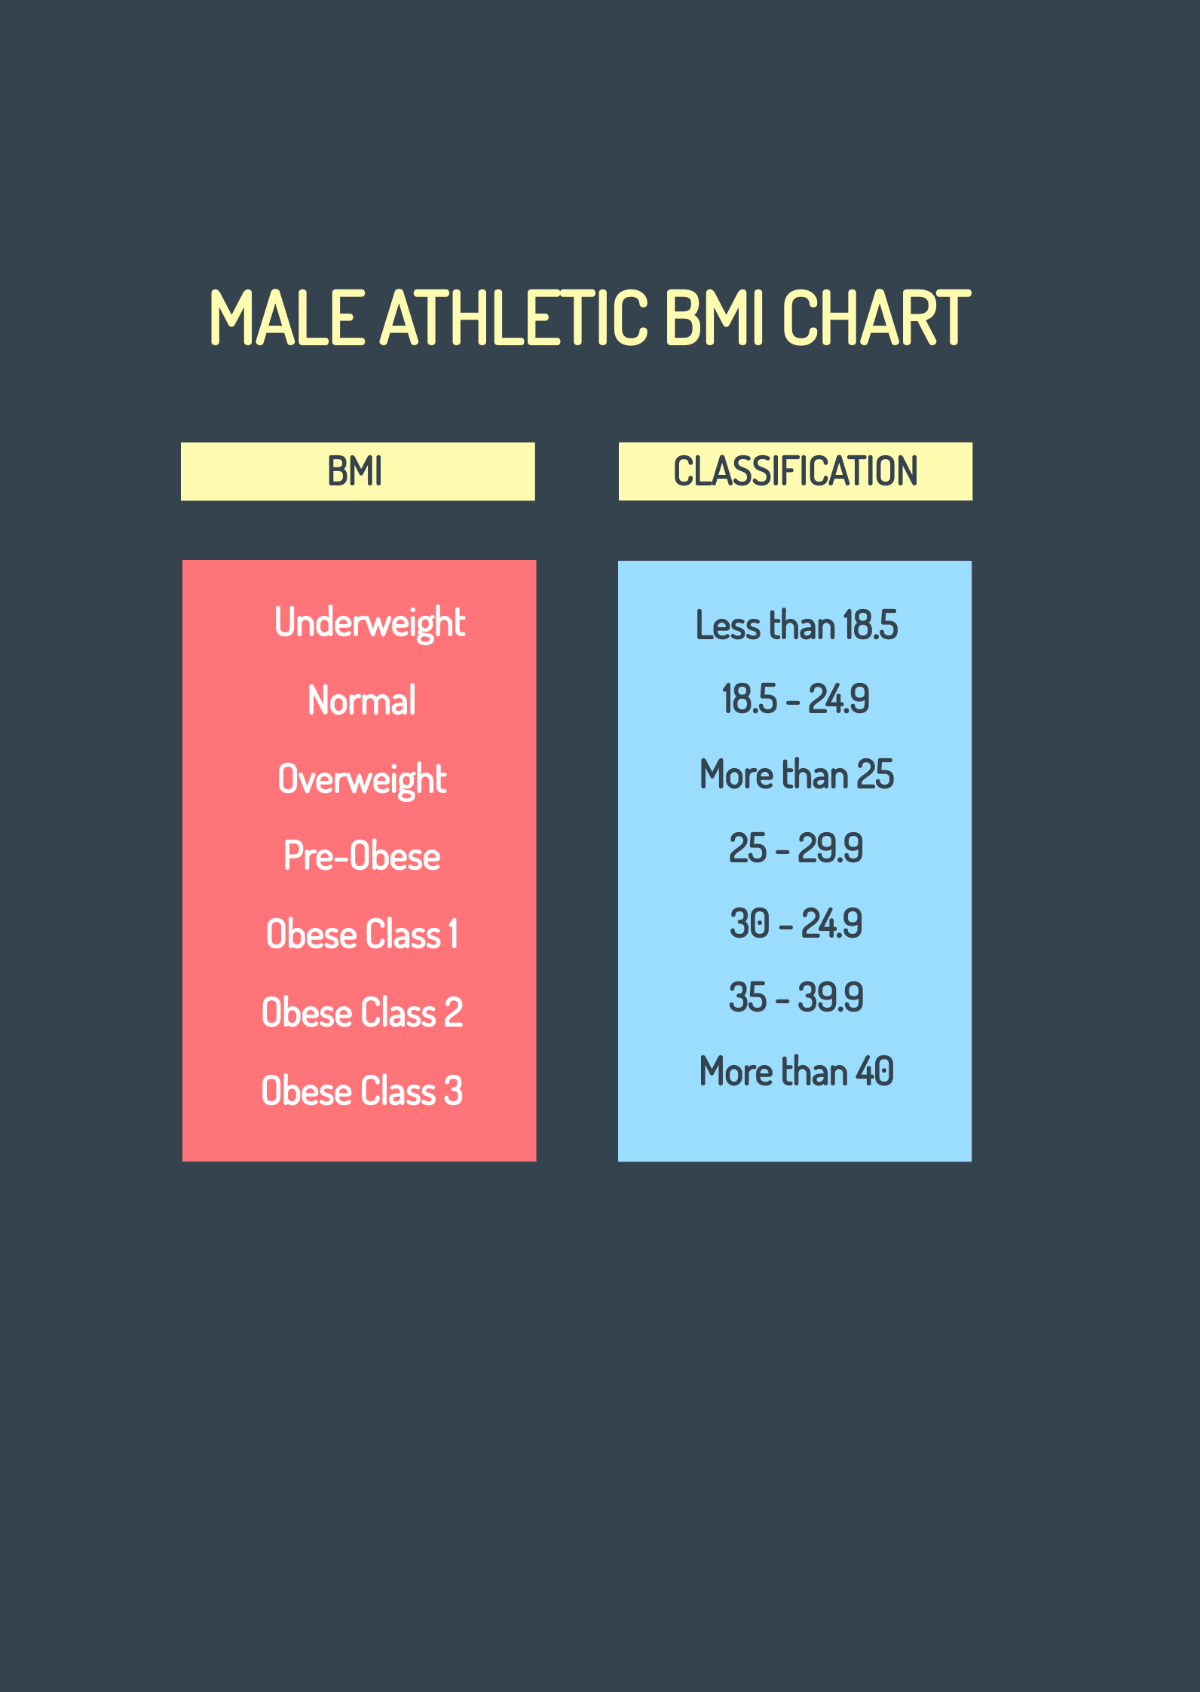 Male Athletic BMI Chart Template